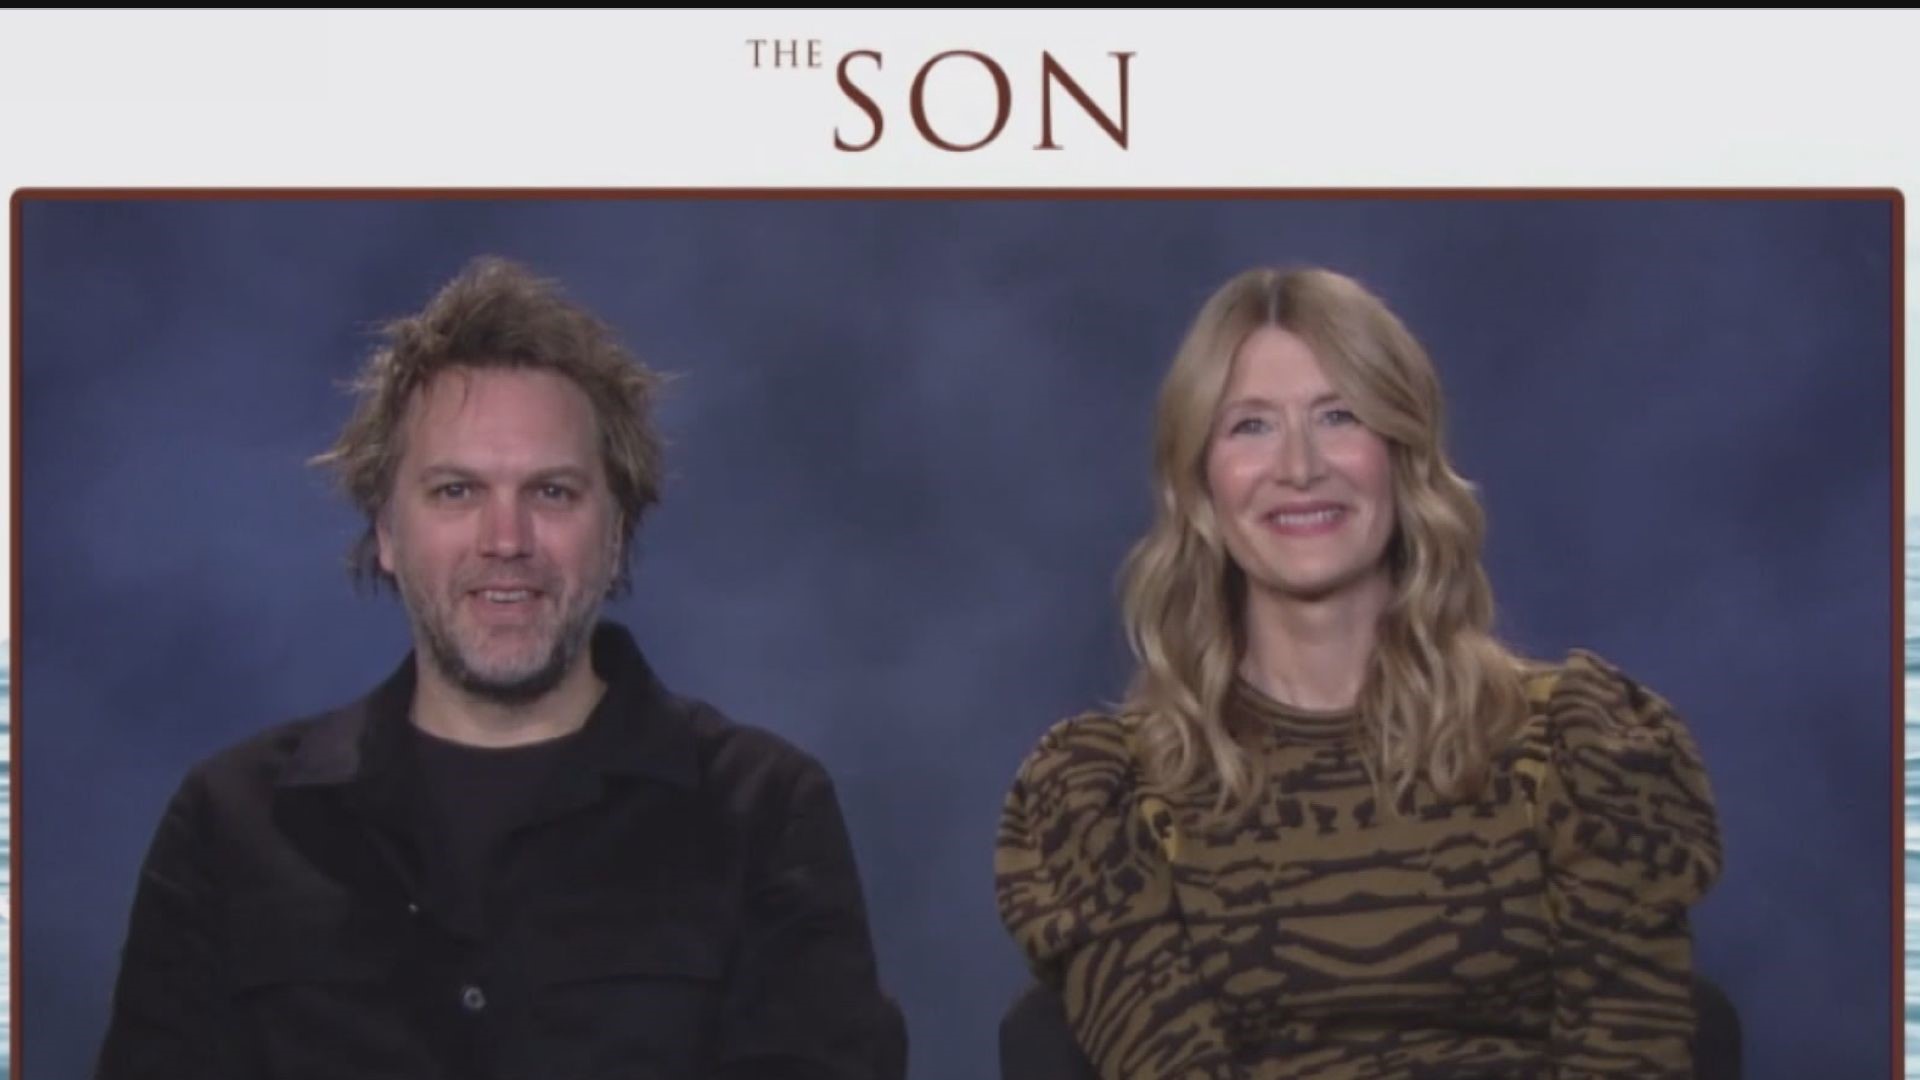 Academy Award winning actress Laura Dern and Director/Screenwriter Florian Zeller talk about their new film 'The Son' which opens in theaters today.